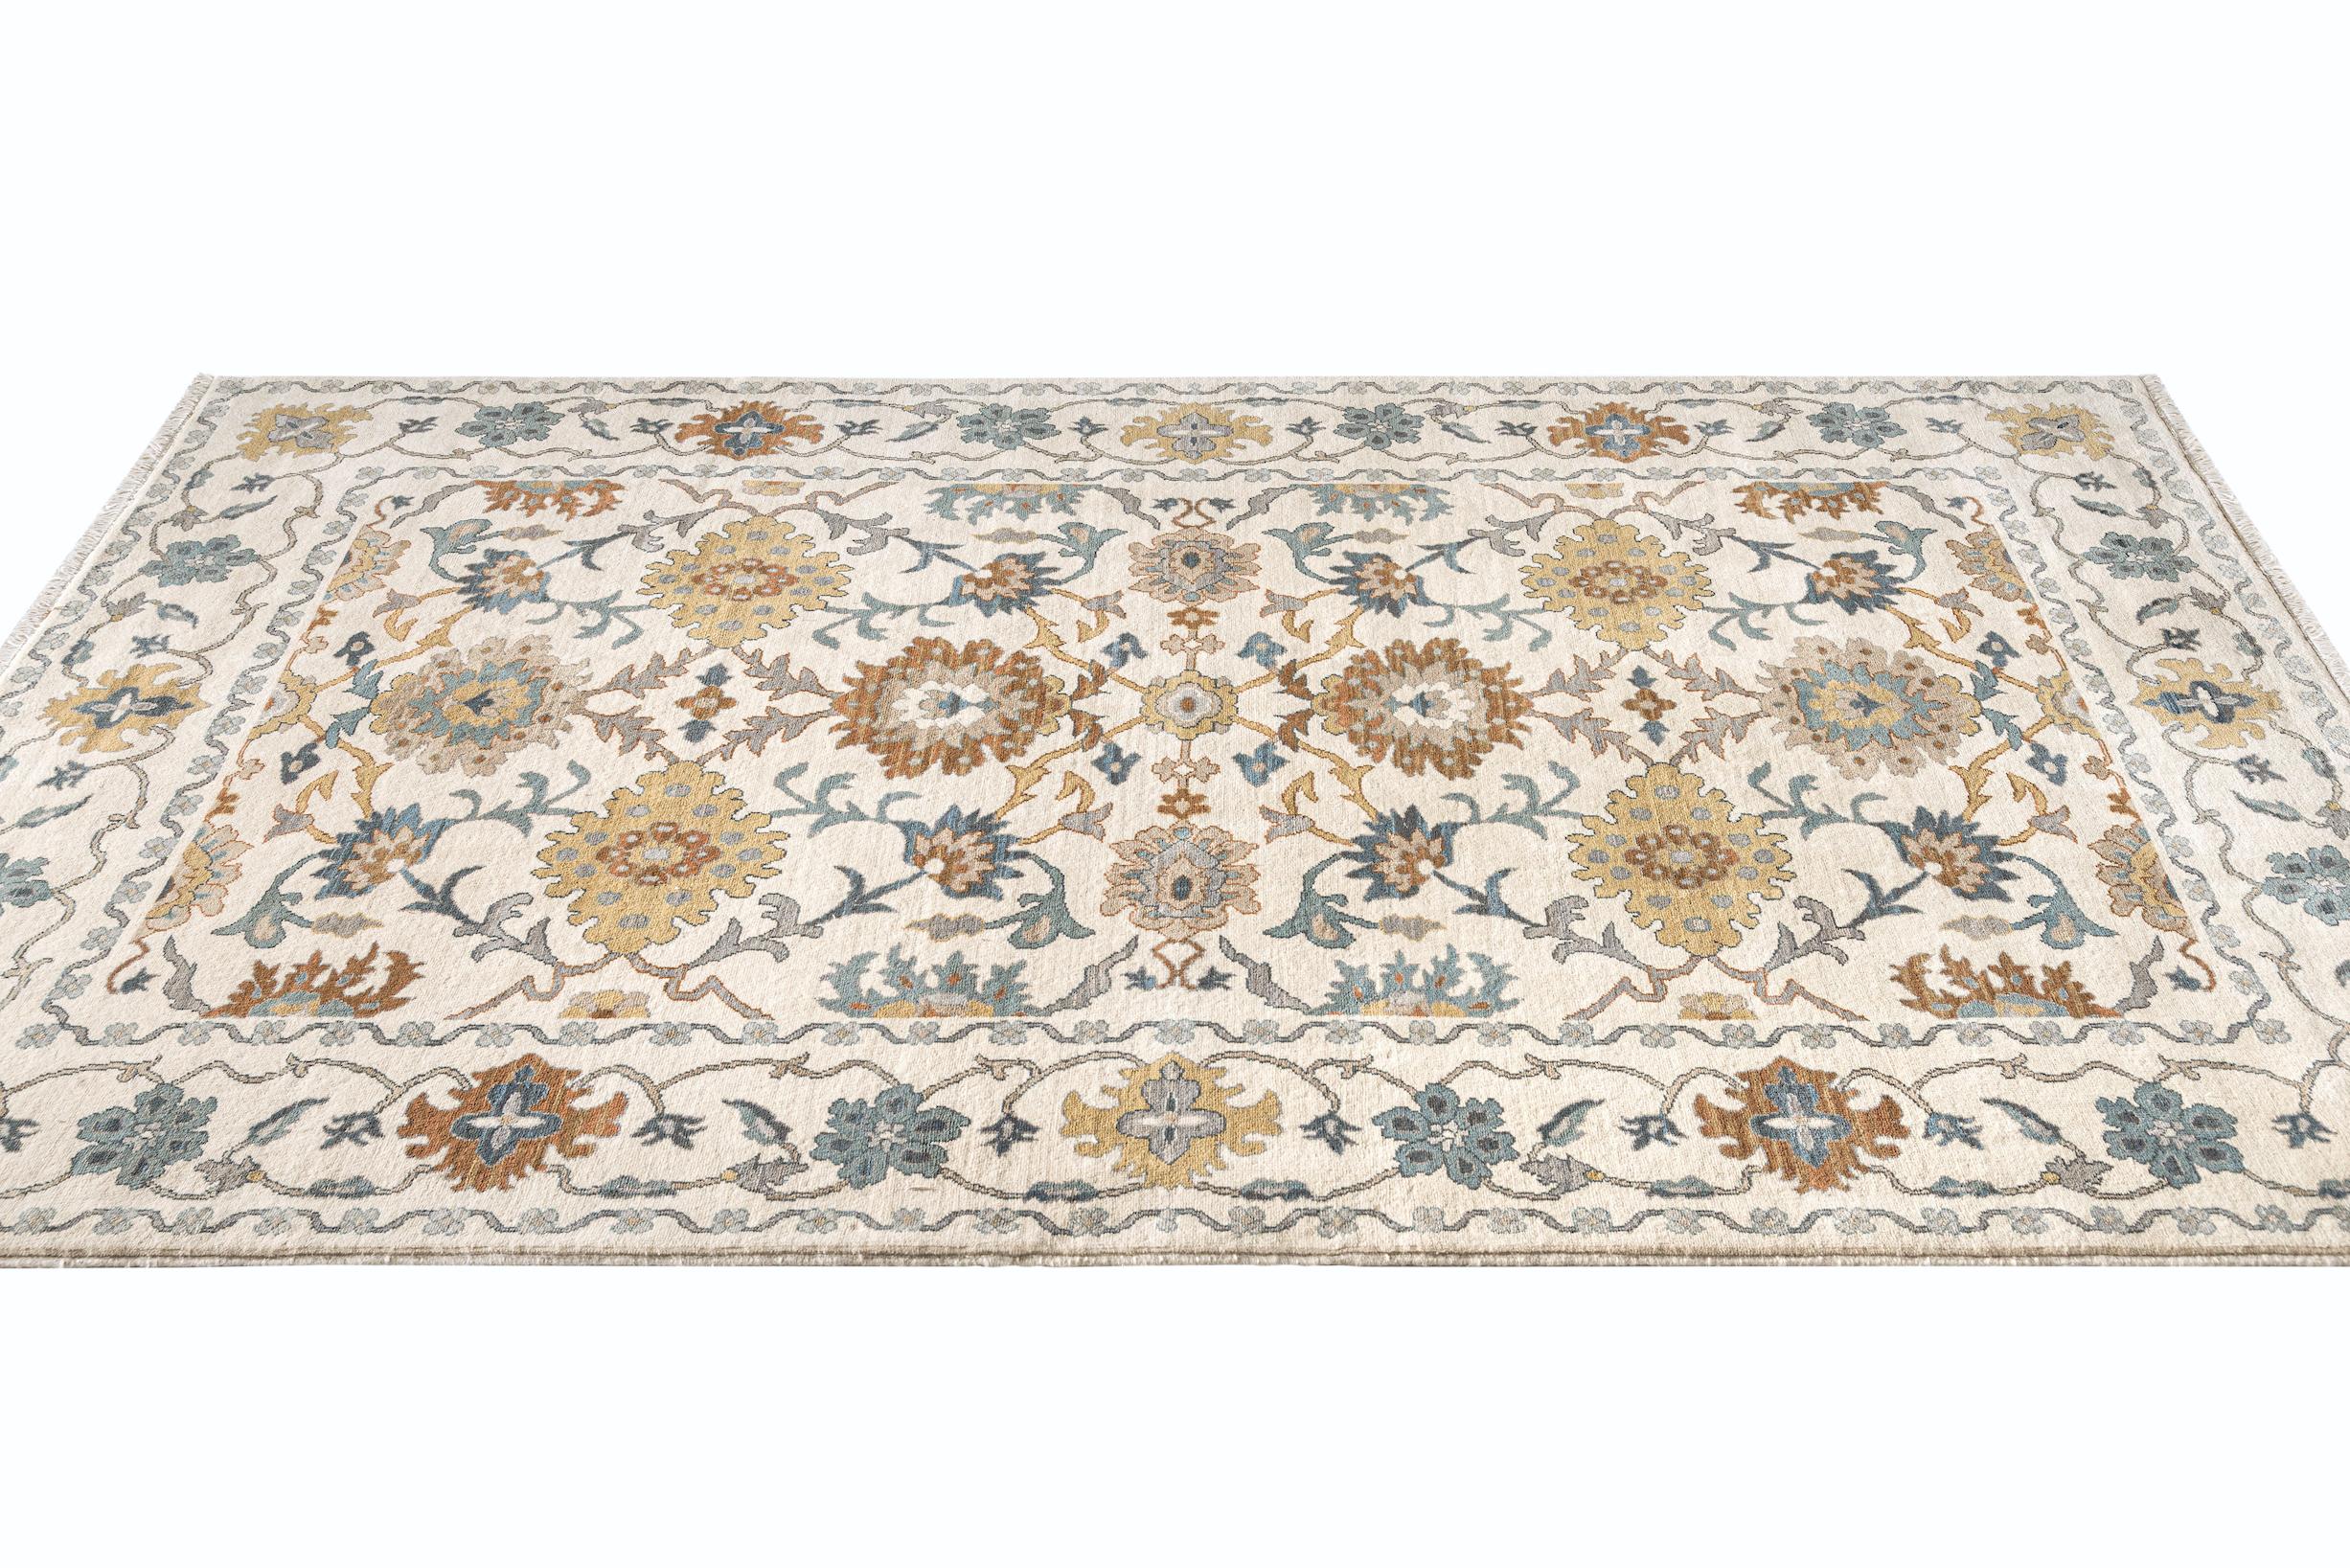 Art Nouveau 21st Century Hand-Knotted Egyptian Ziegler Rug in Beige Blue Floral Pattern For Sale